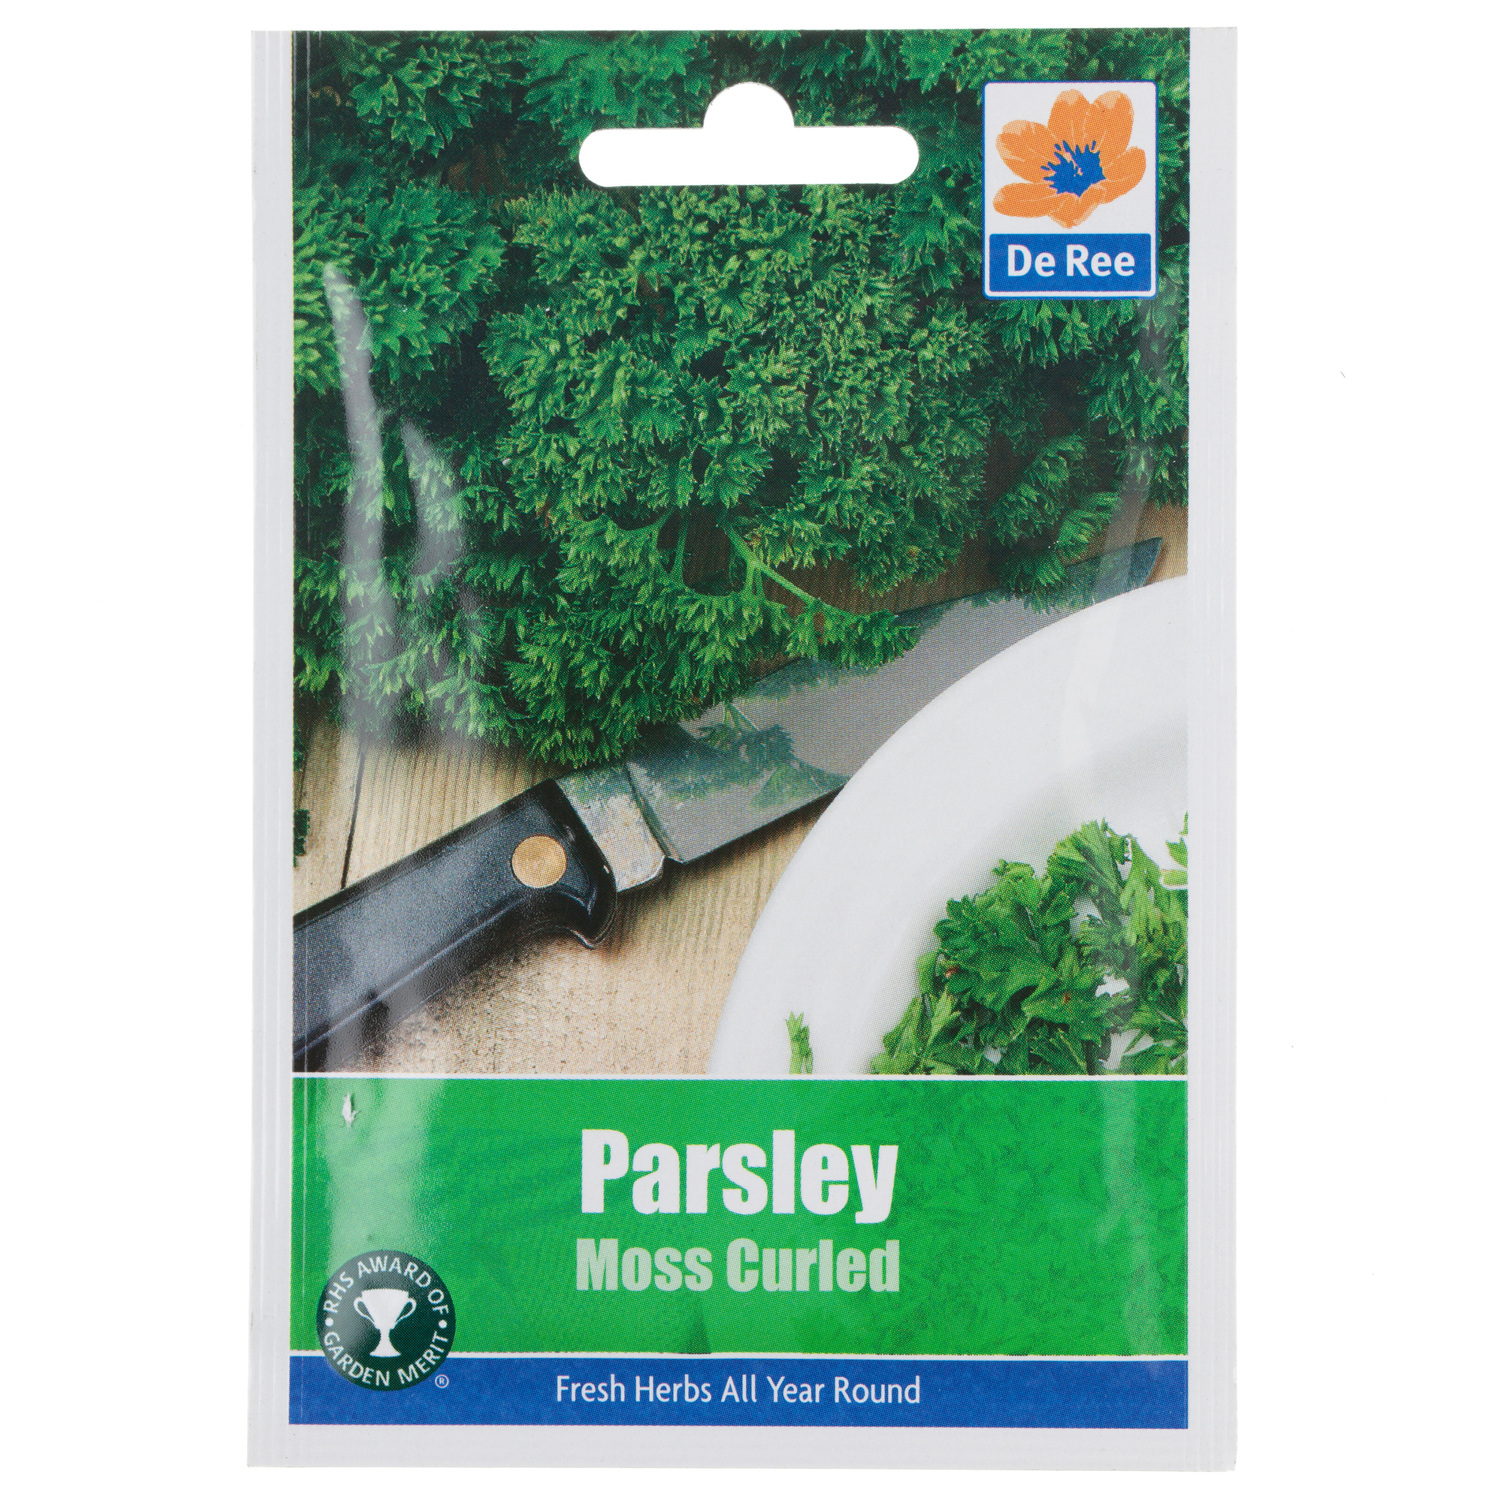 De Ree Parsley Moss Curled 2 Seed Packet Image